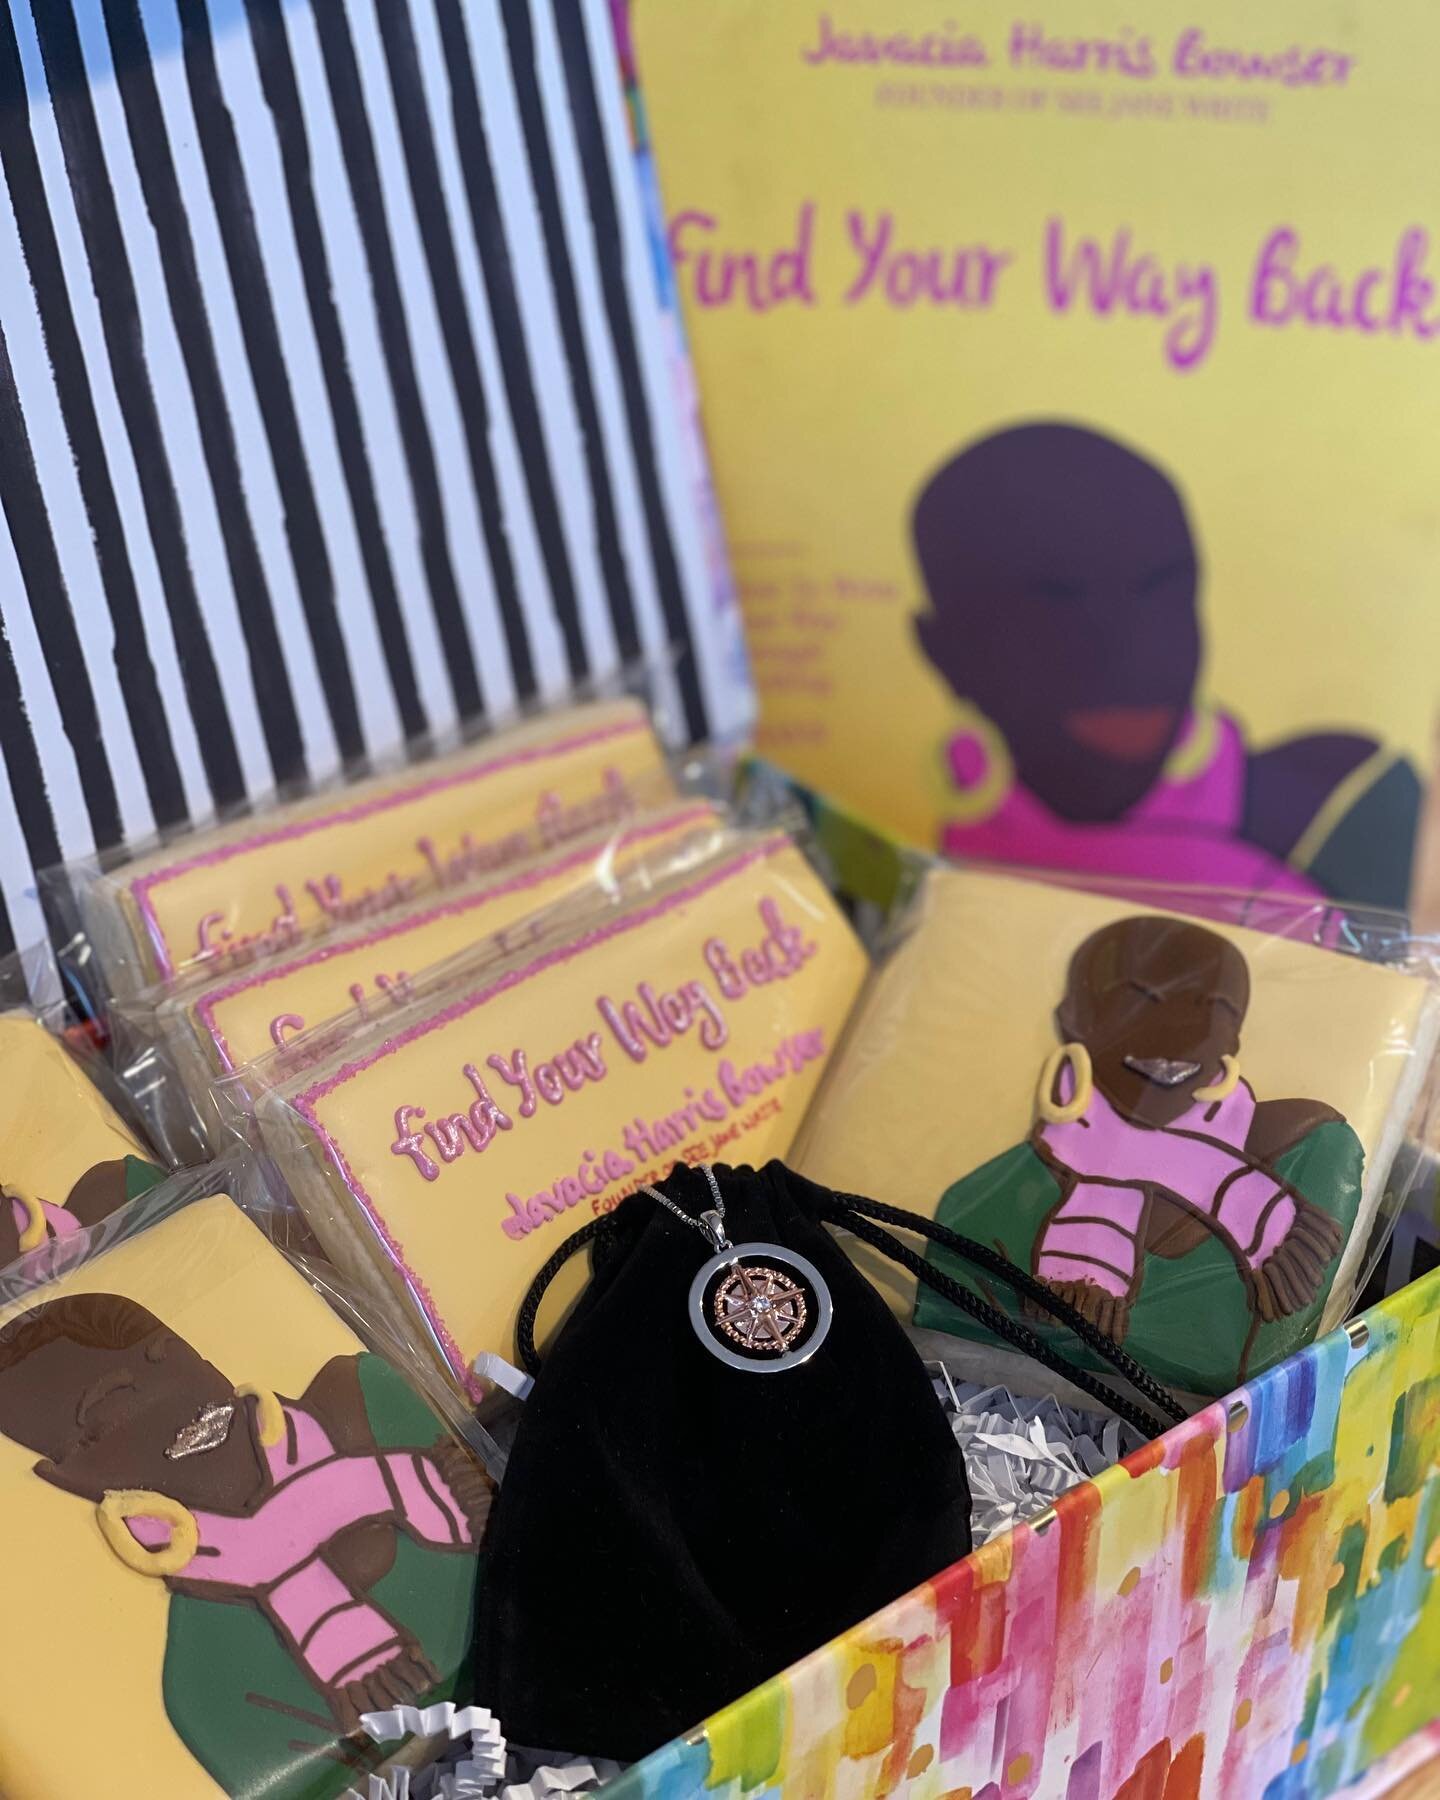 This beautiful gift box was crafted by @shinebycharlene for her friend @seejavaciawrite to celebrate the release of her new book, Find Your Way Back. You can snag a copy at seejanewritebham.com! 

&ldquo;This book is for the woman who has wanted to w